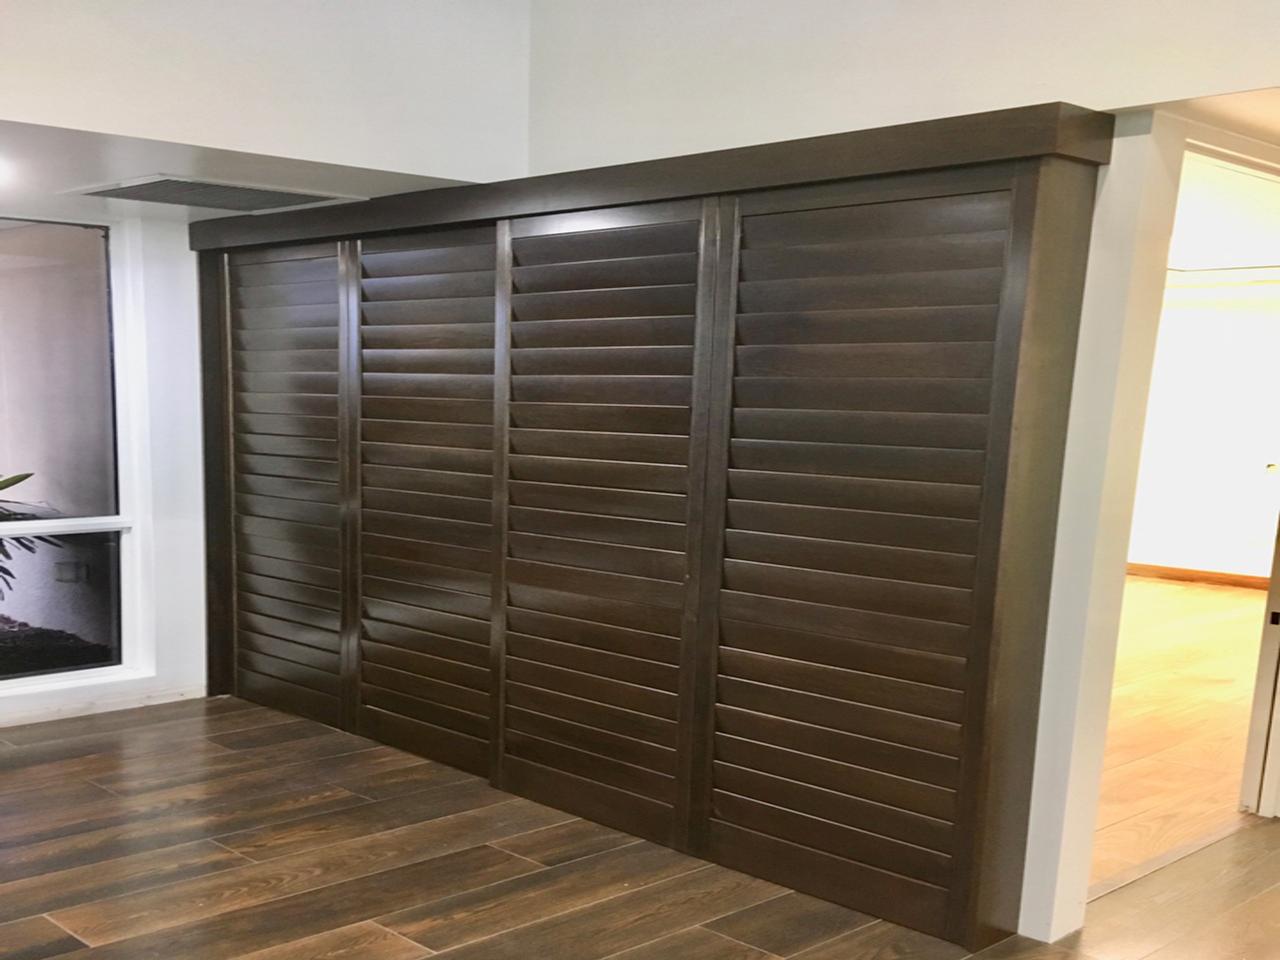 Stained Heritage shutters used as a divider